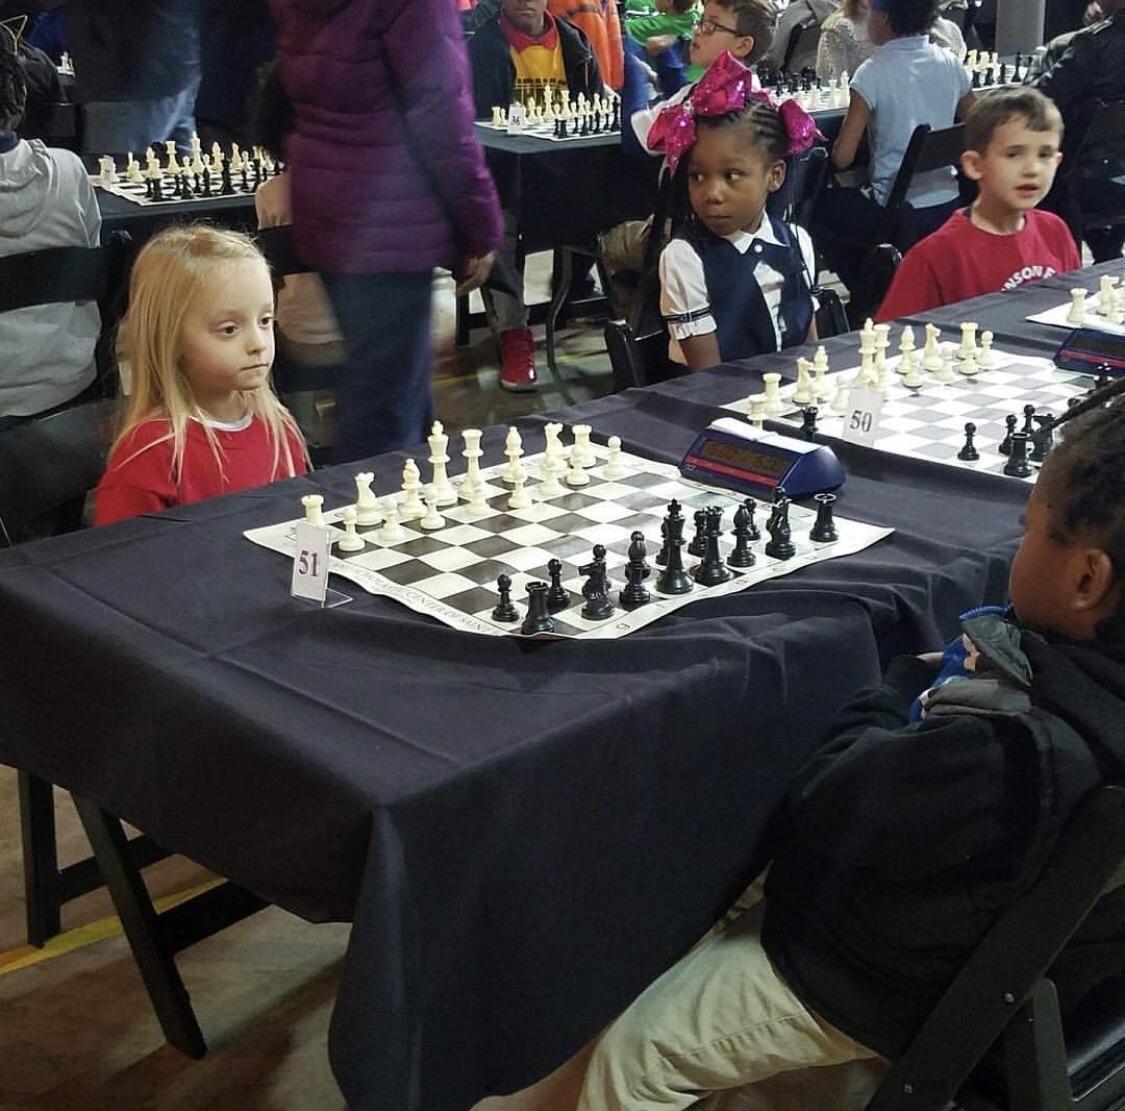 Friend of mine’s daughter was in a chess competition. Safe to say she brought her game face.